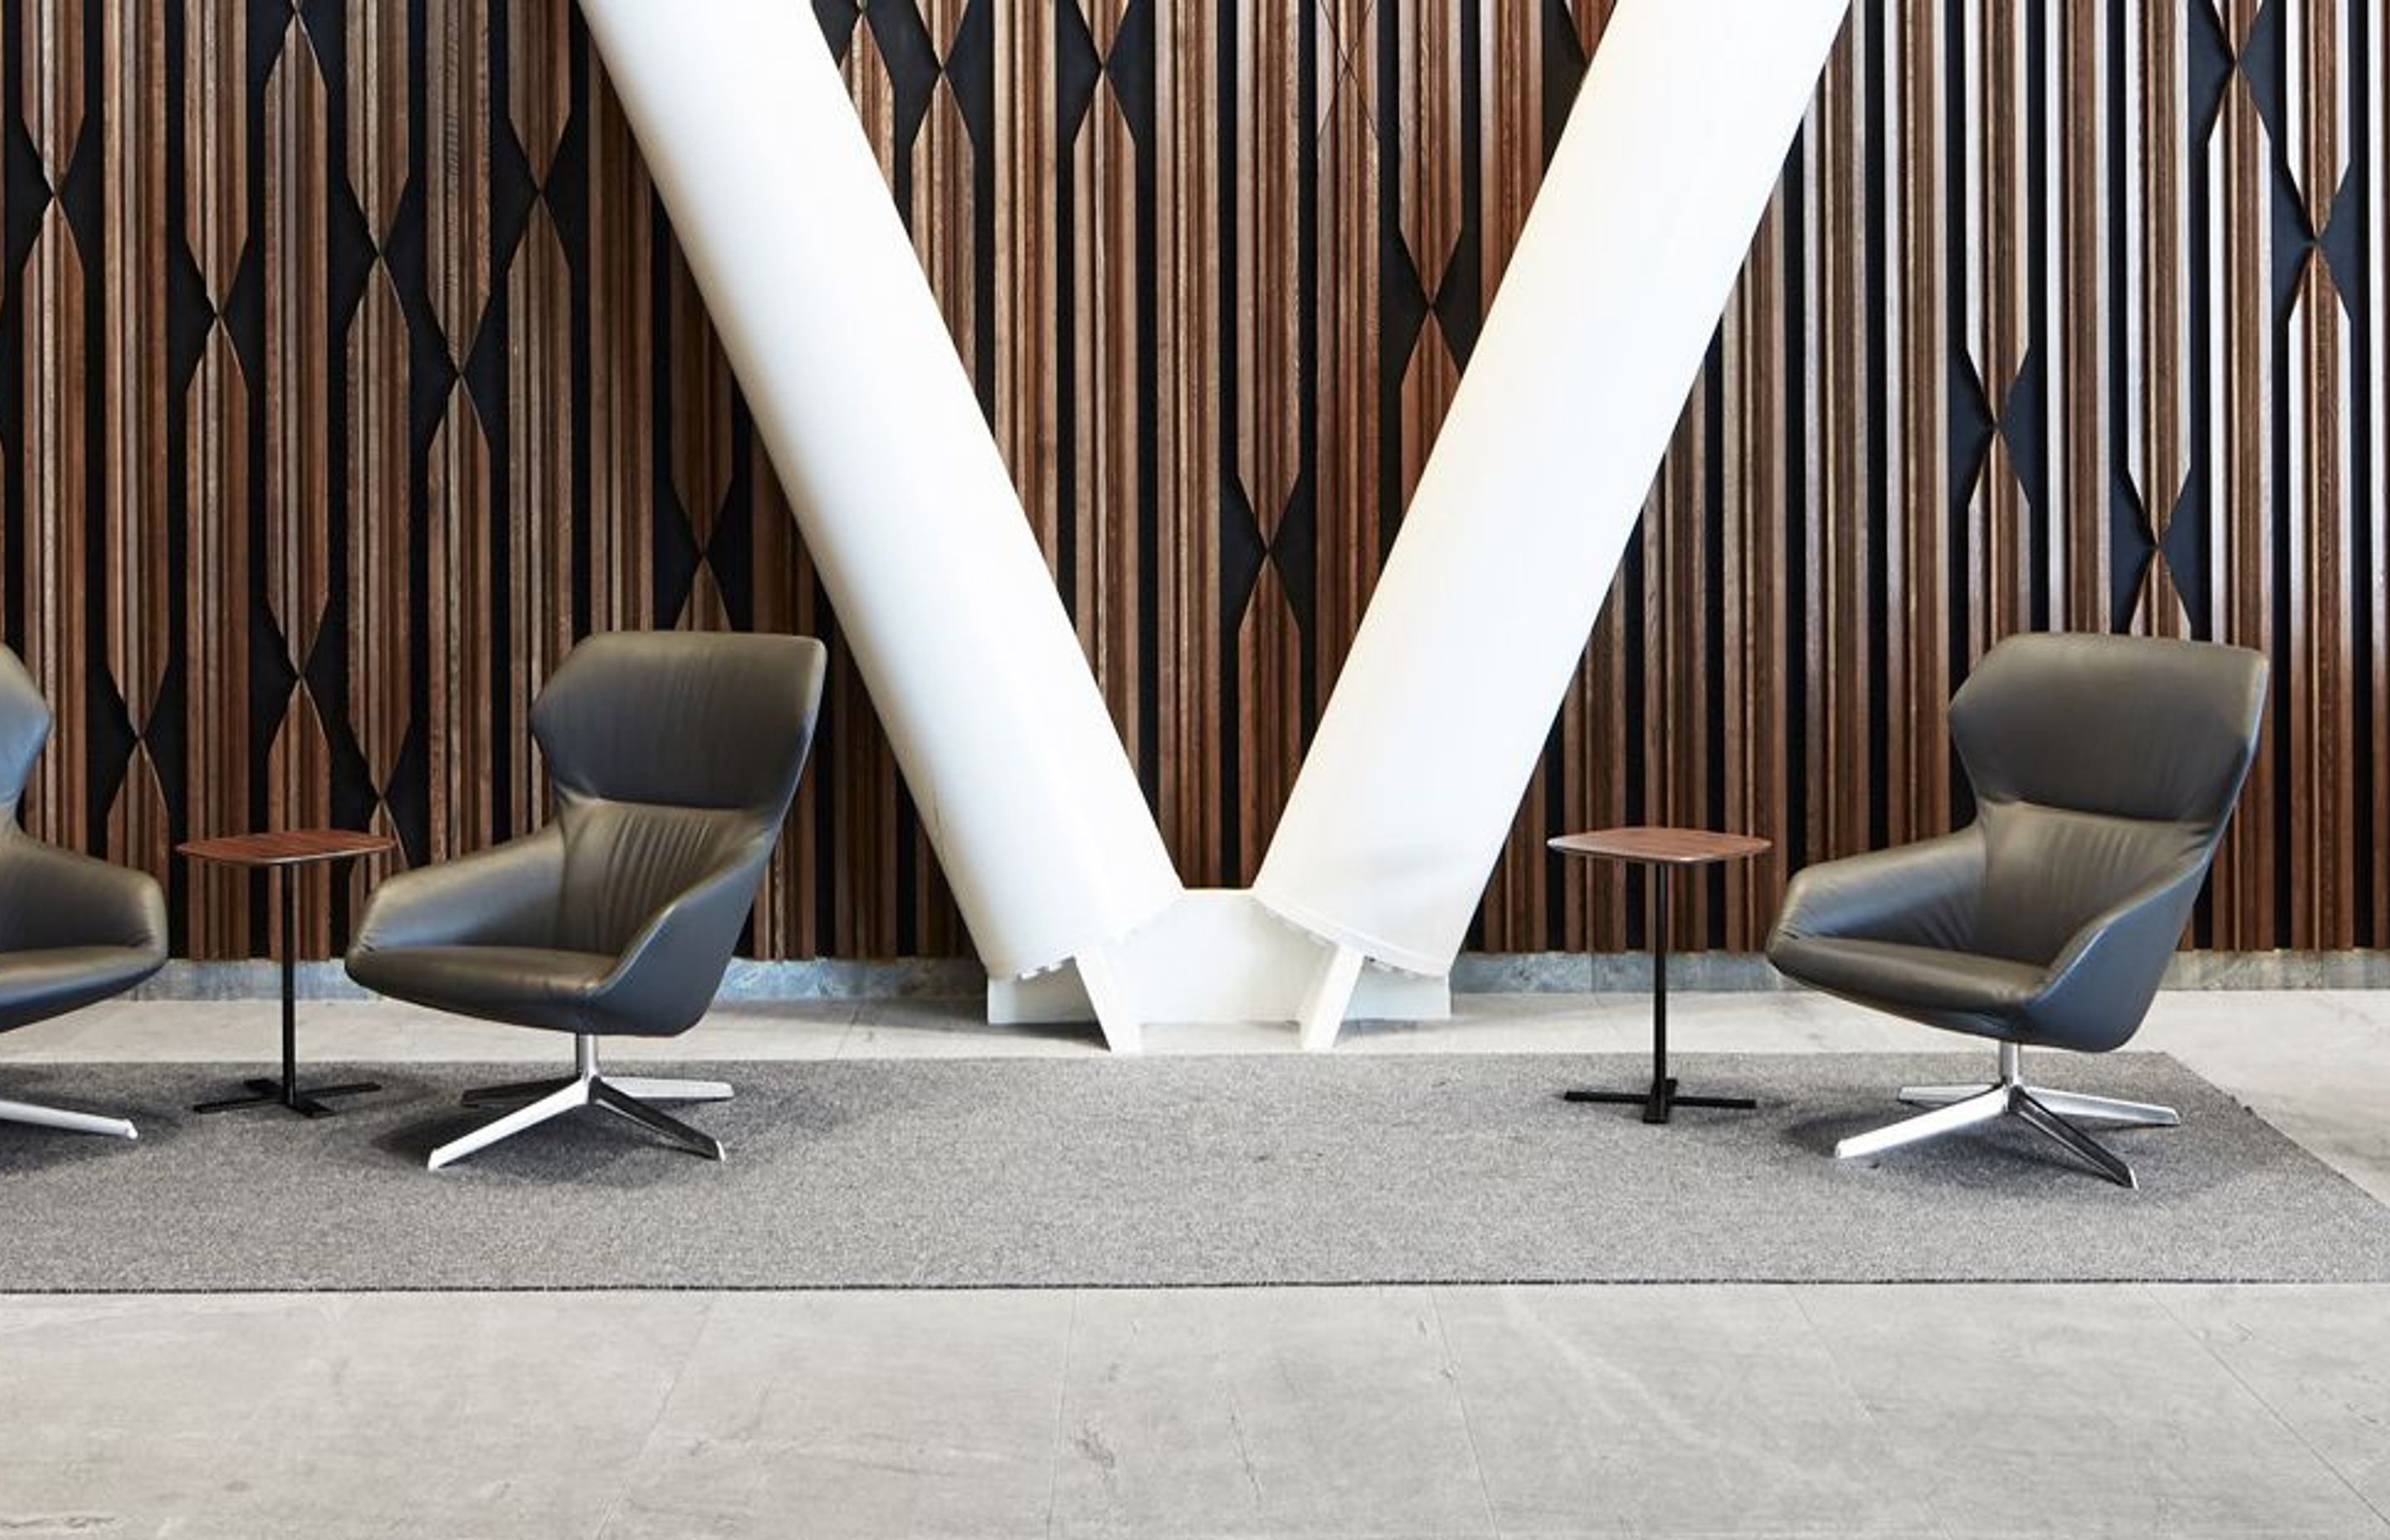 The lobby of XXCQ utilises natural materials, with a timber-panelled feature wall, angular reception desk in polished stone and brass, and curvaceous Scandinavian-style leather-clad chairs.